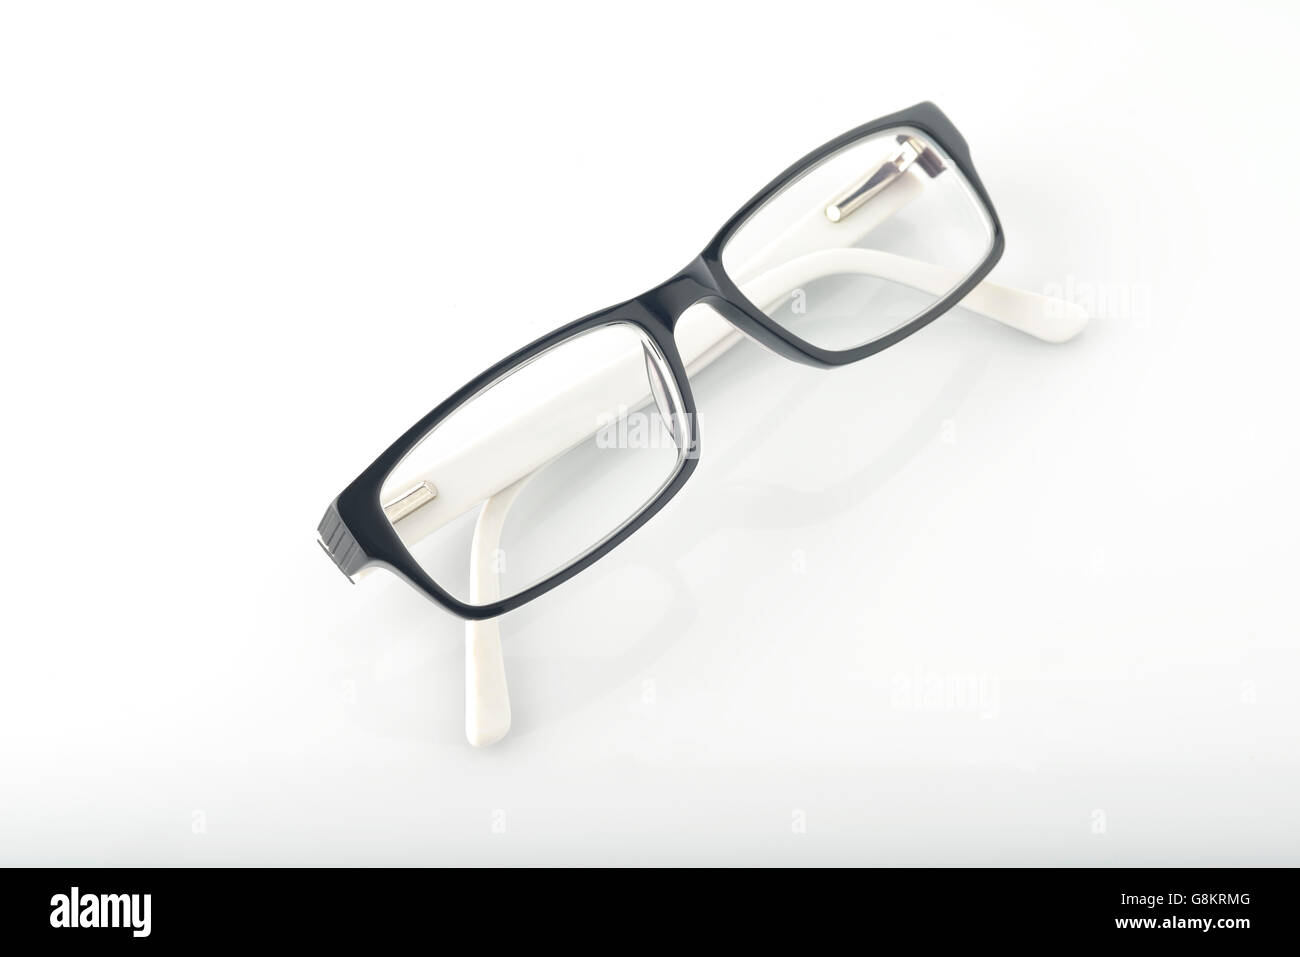 Spectacles Stock Photo